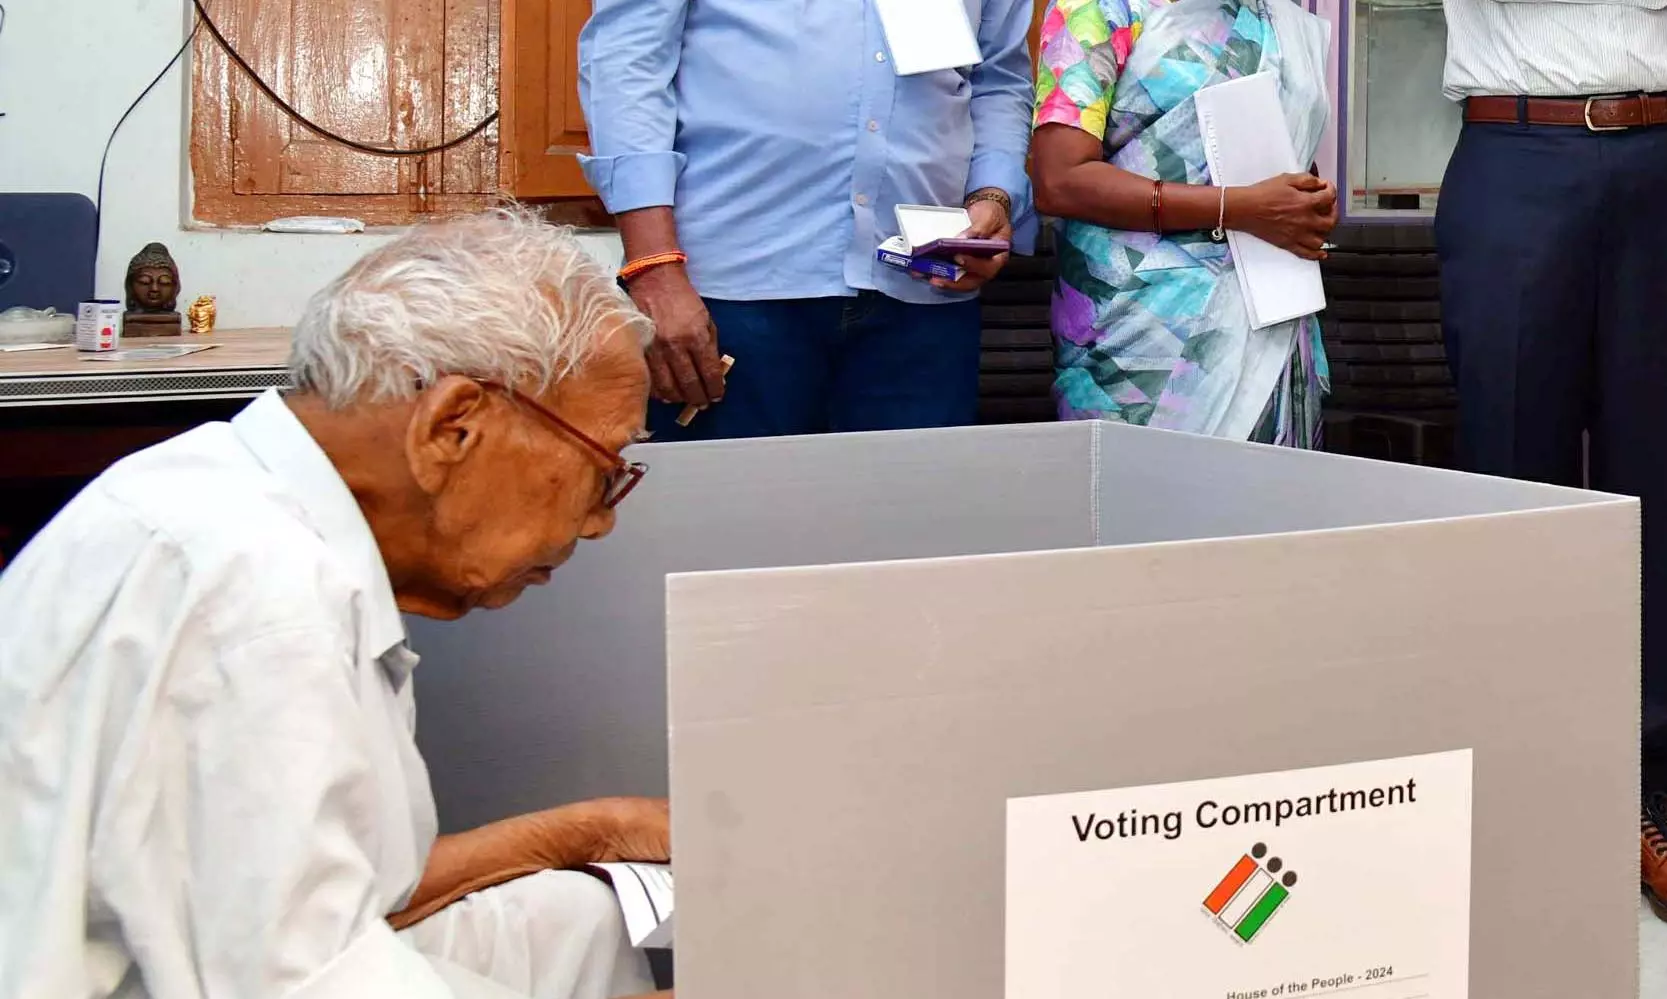 Only 3 per cent eligible voters opted for home voting in AP